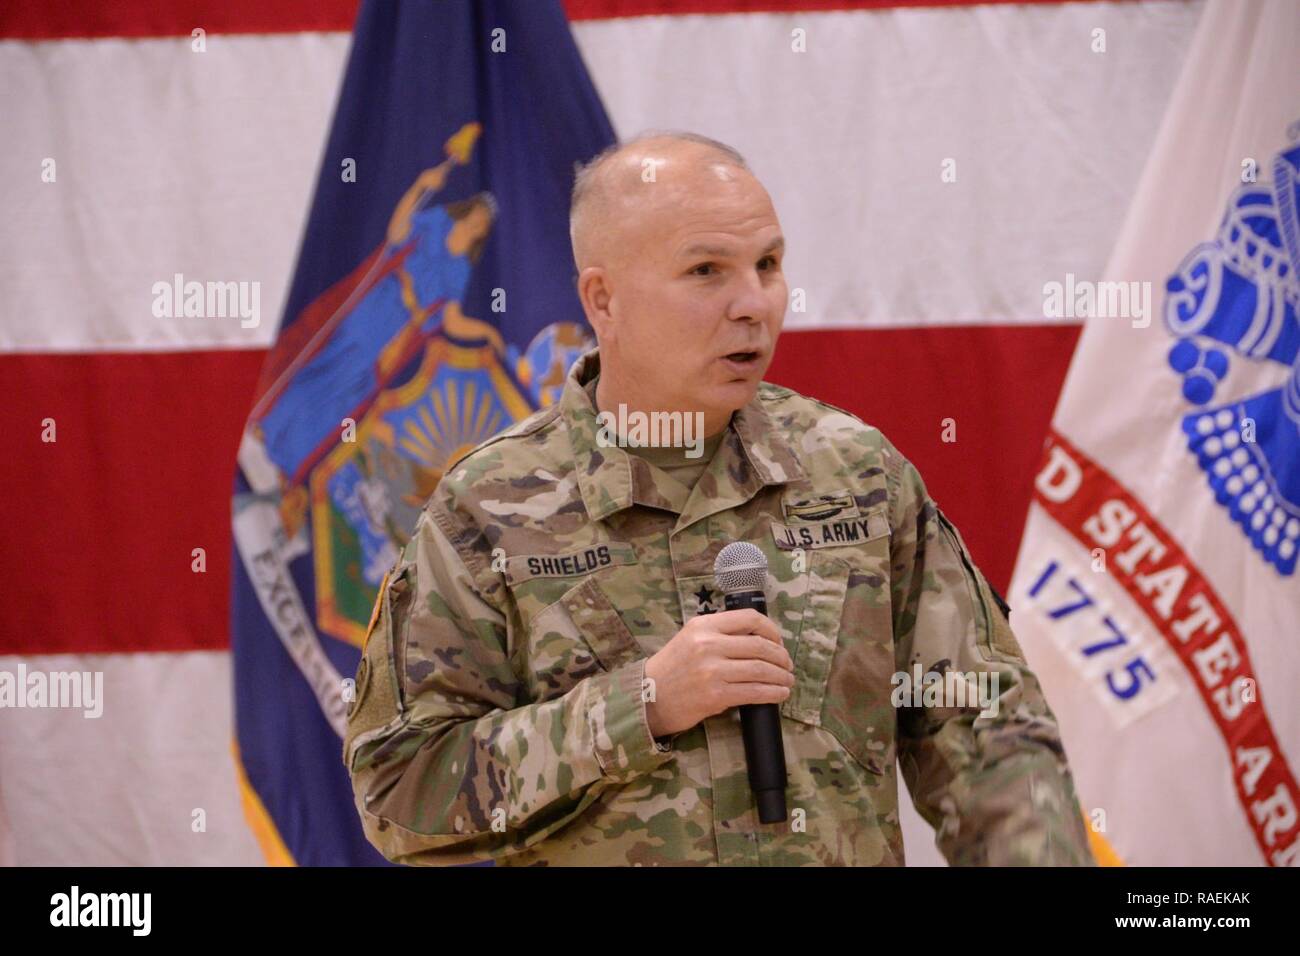 Major General Ray Shields, the Adjutant General of New York, speaks to Guard members and civilian employees during a ceremony marking the 382nd Birthday of the National Guard held at New York National Guard Headquarters in Latham, N.Y. on Thursday, Dec. 13, 2018. New York National Guard members and employees of the New York State Division of Military and Naval Affairs made time for a short ceremony to mark the National Guard's 382nd Birthday . ( U.S. Army National Guard Stock Photo